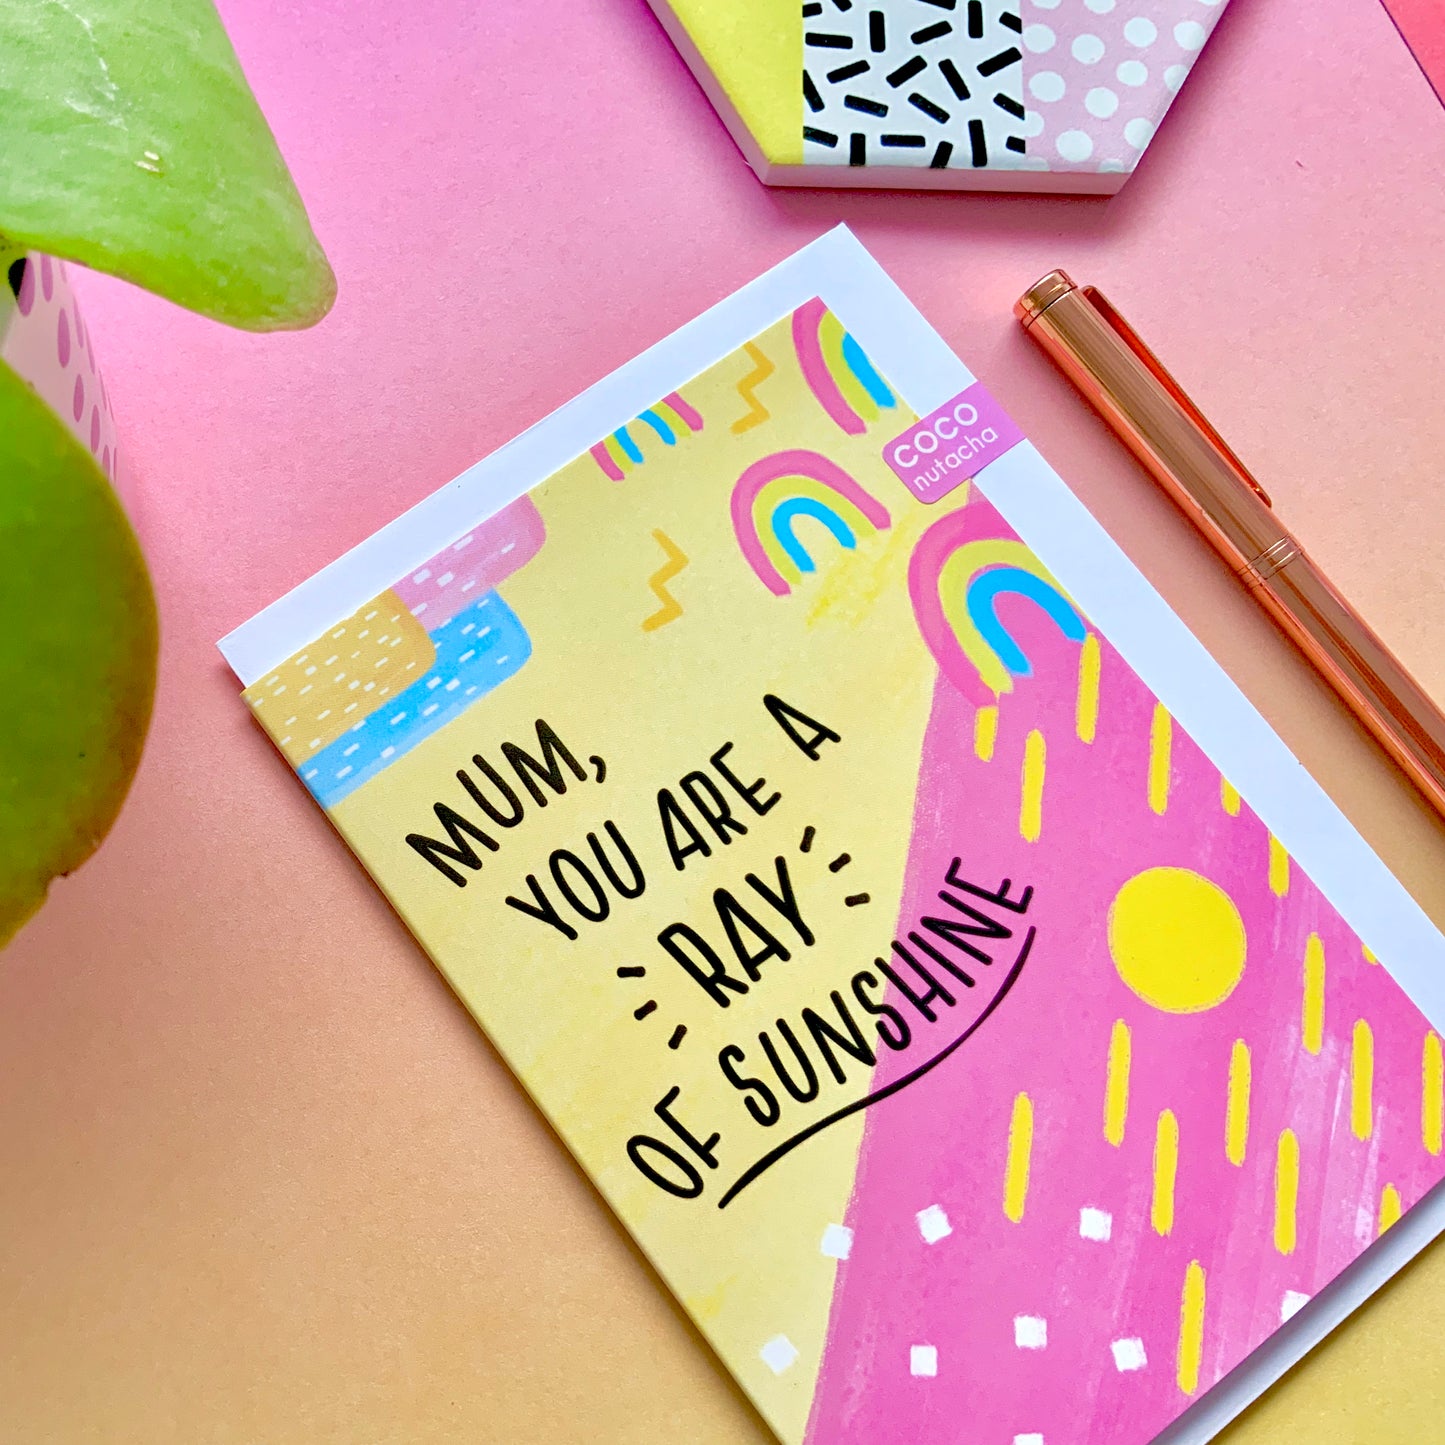 Mum, you are a Ray of Sunshine Greeting Card